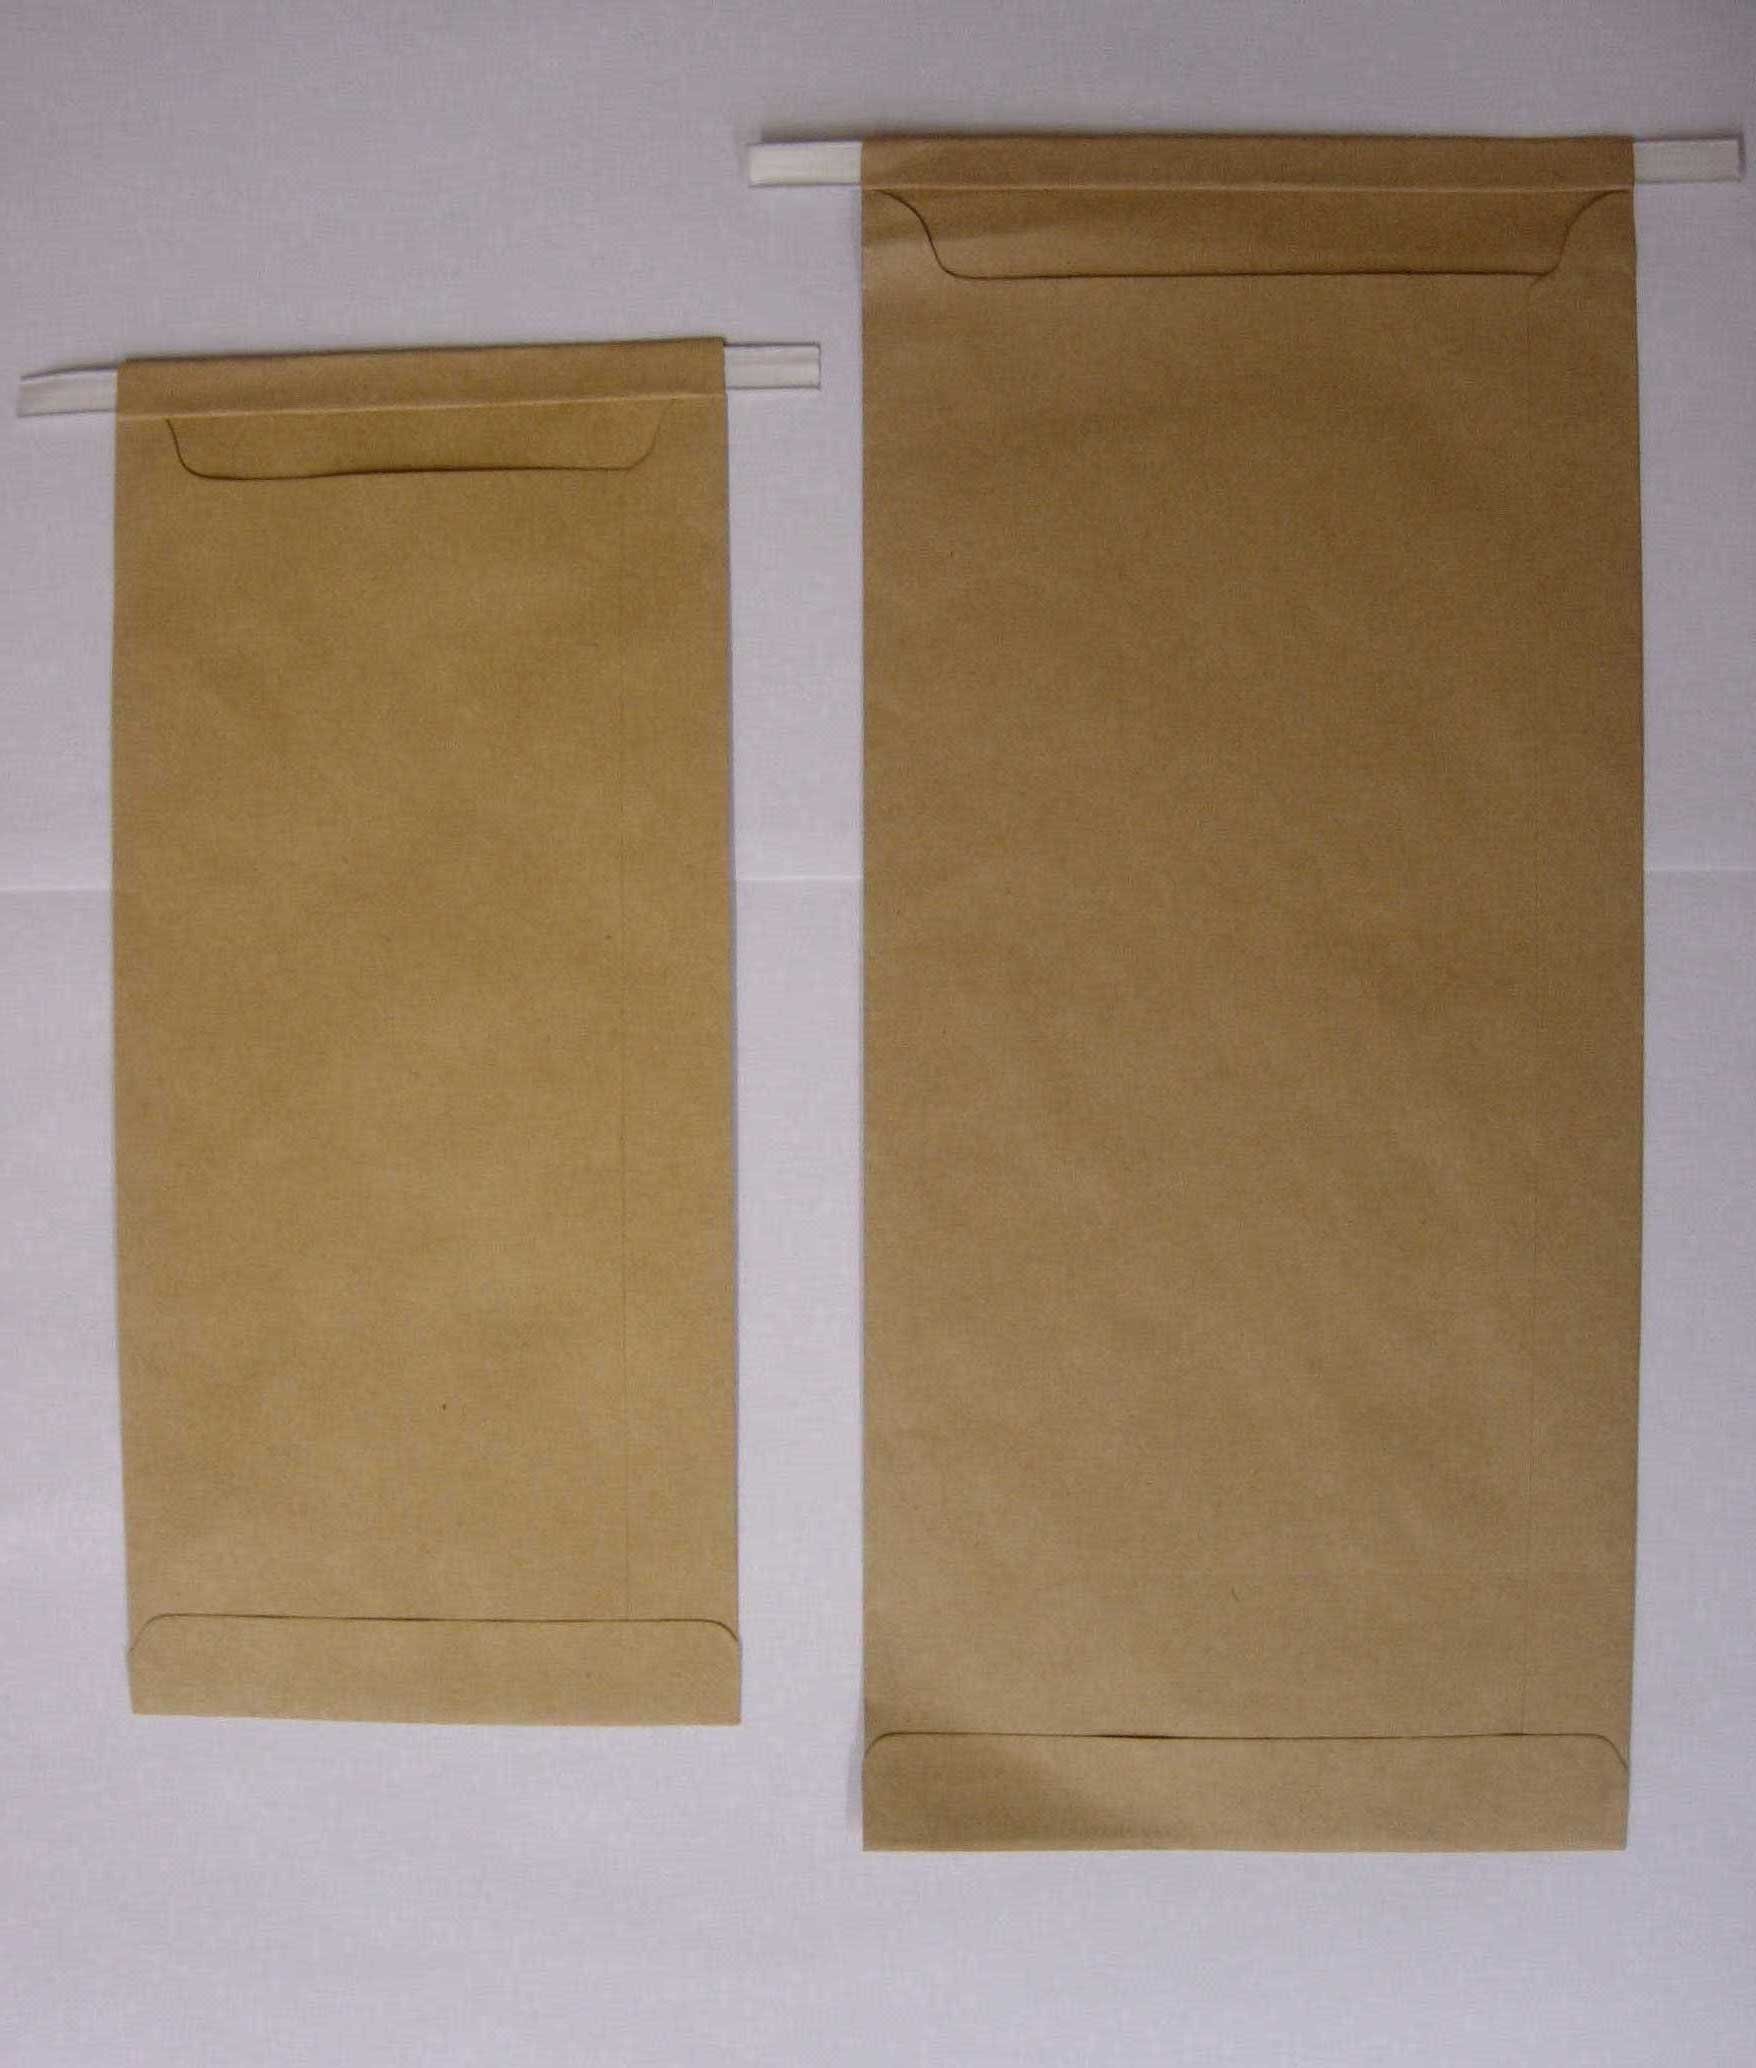 Figure 4. 4x8 inch and 5x10 inch Kraft bags.